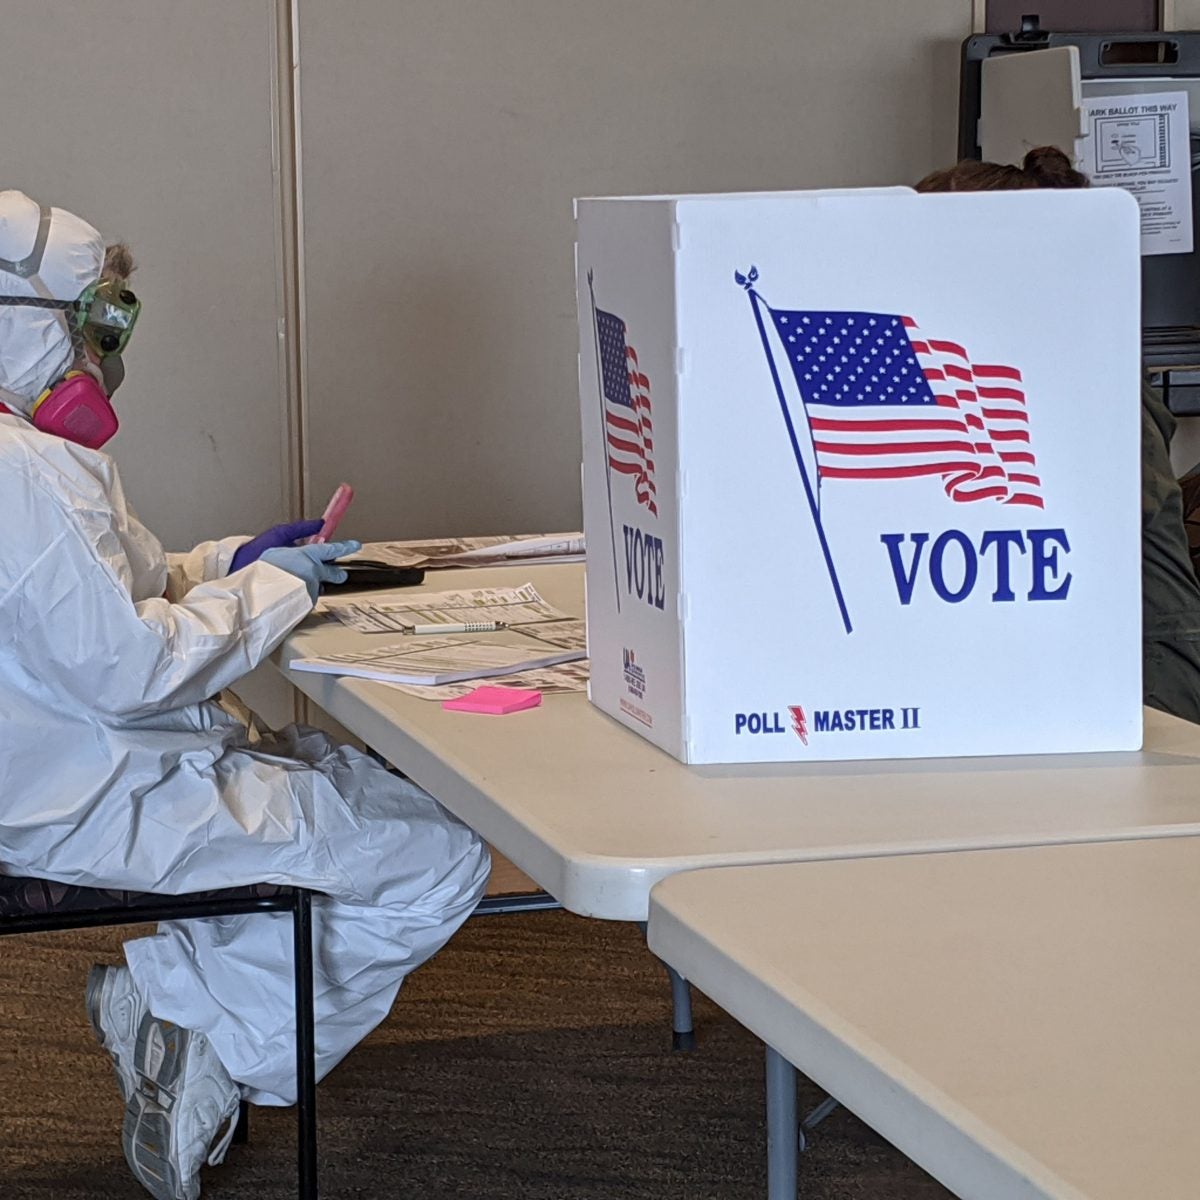 At Least 36 People Tested Positive For COVID-19 Following Wisconsin Primary Election